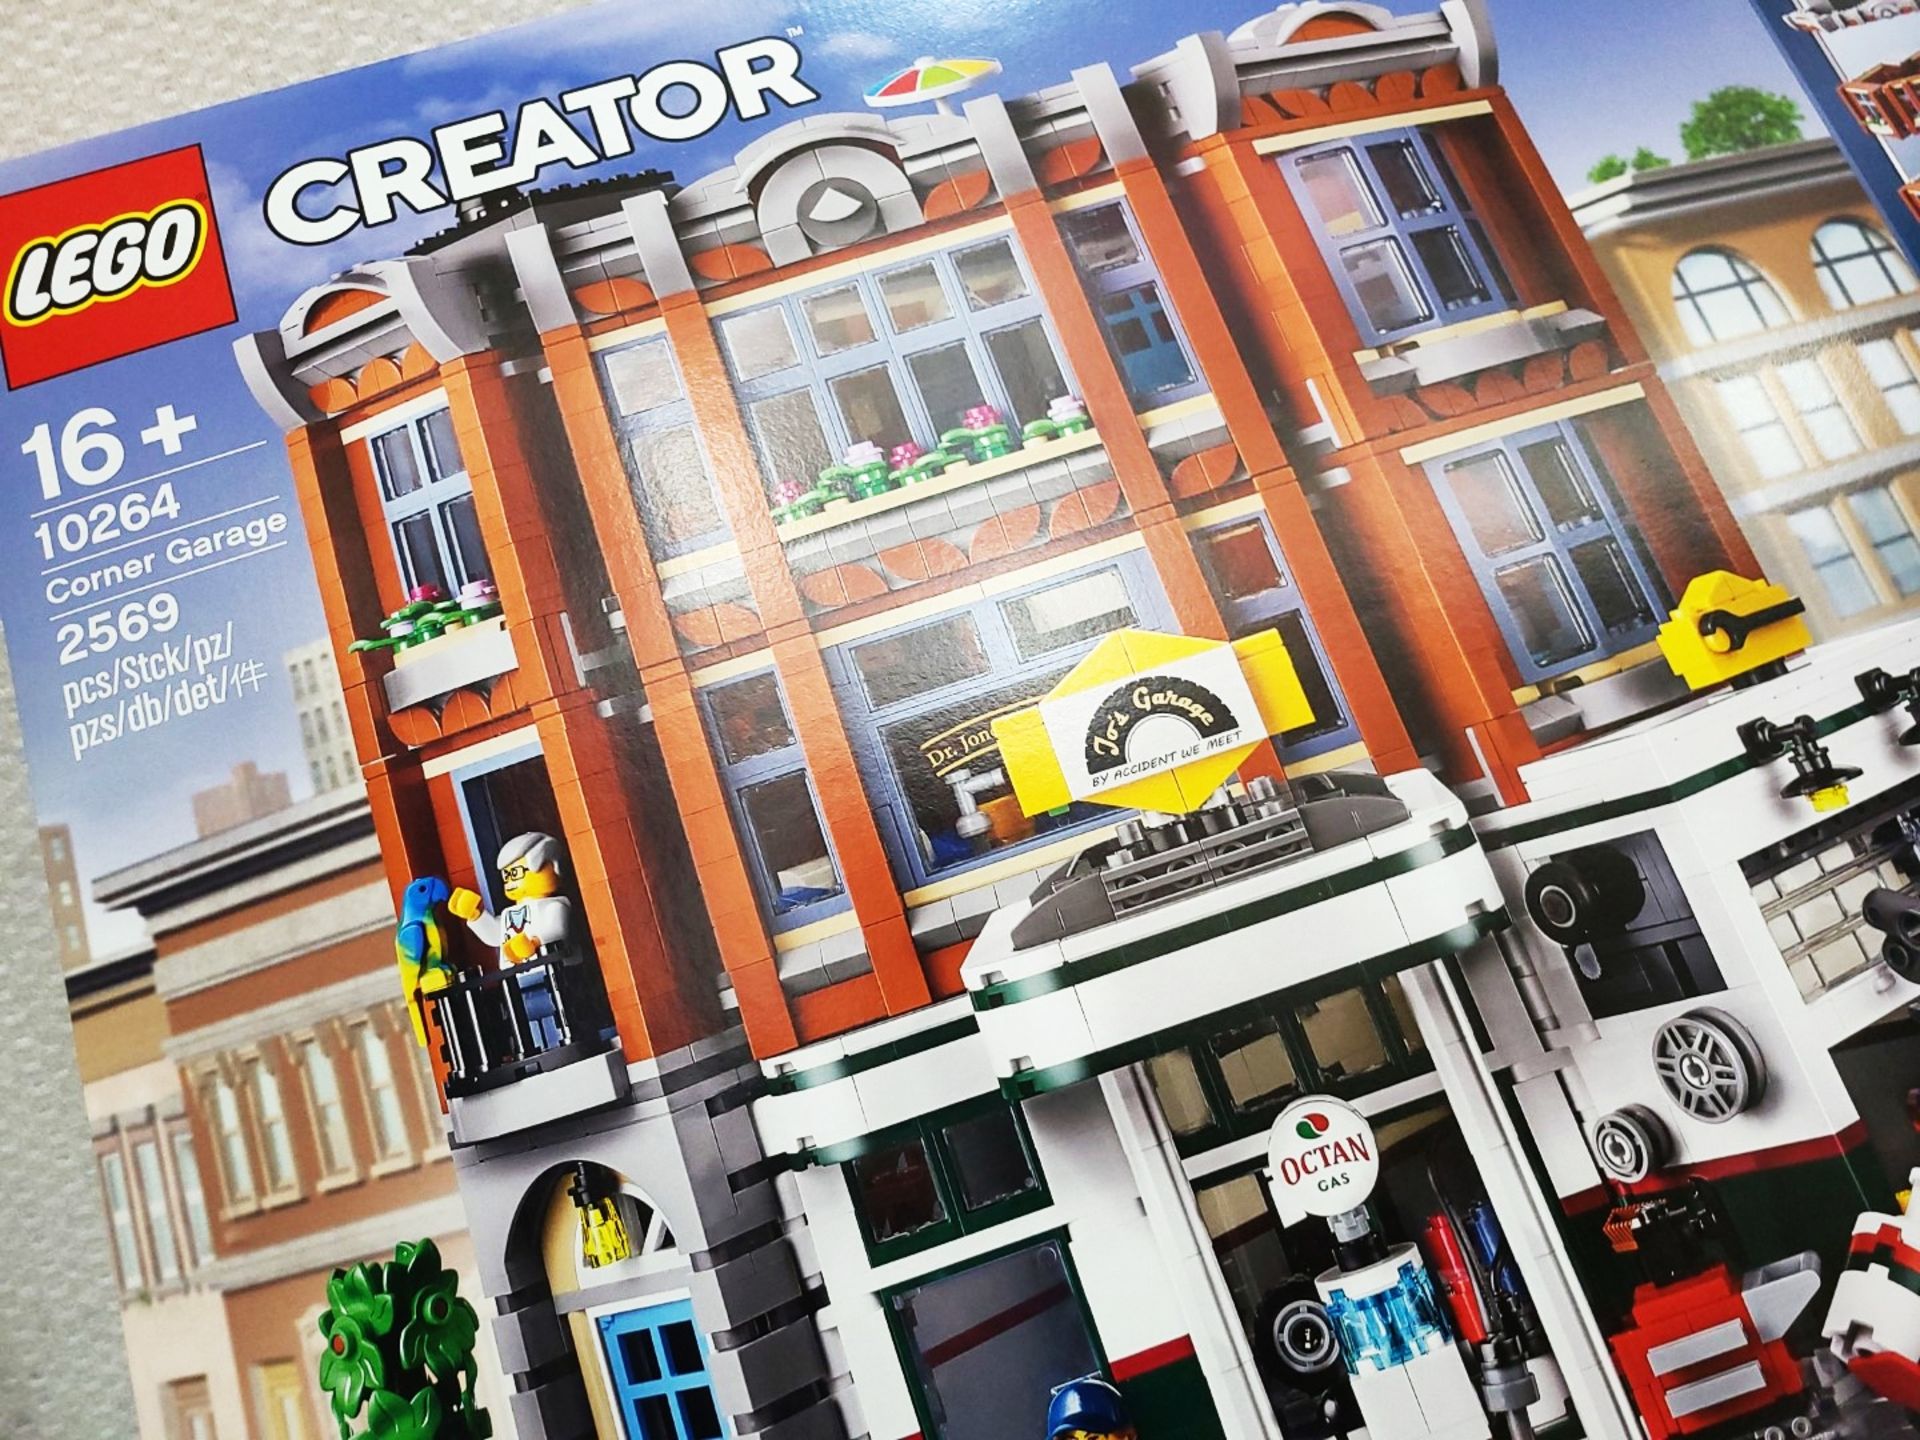 1 x LEGO Creator Expert 10264 Corner Garage And Vet Clinic Set with 6 Minifigures - RRP £260.00 - Image 4 of 5